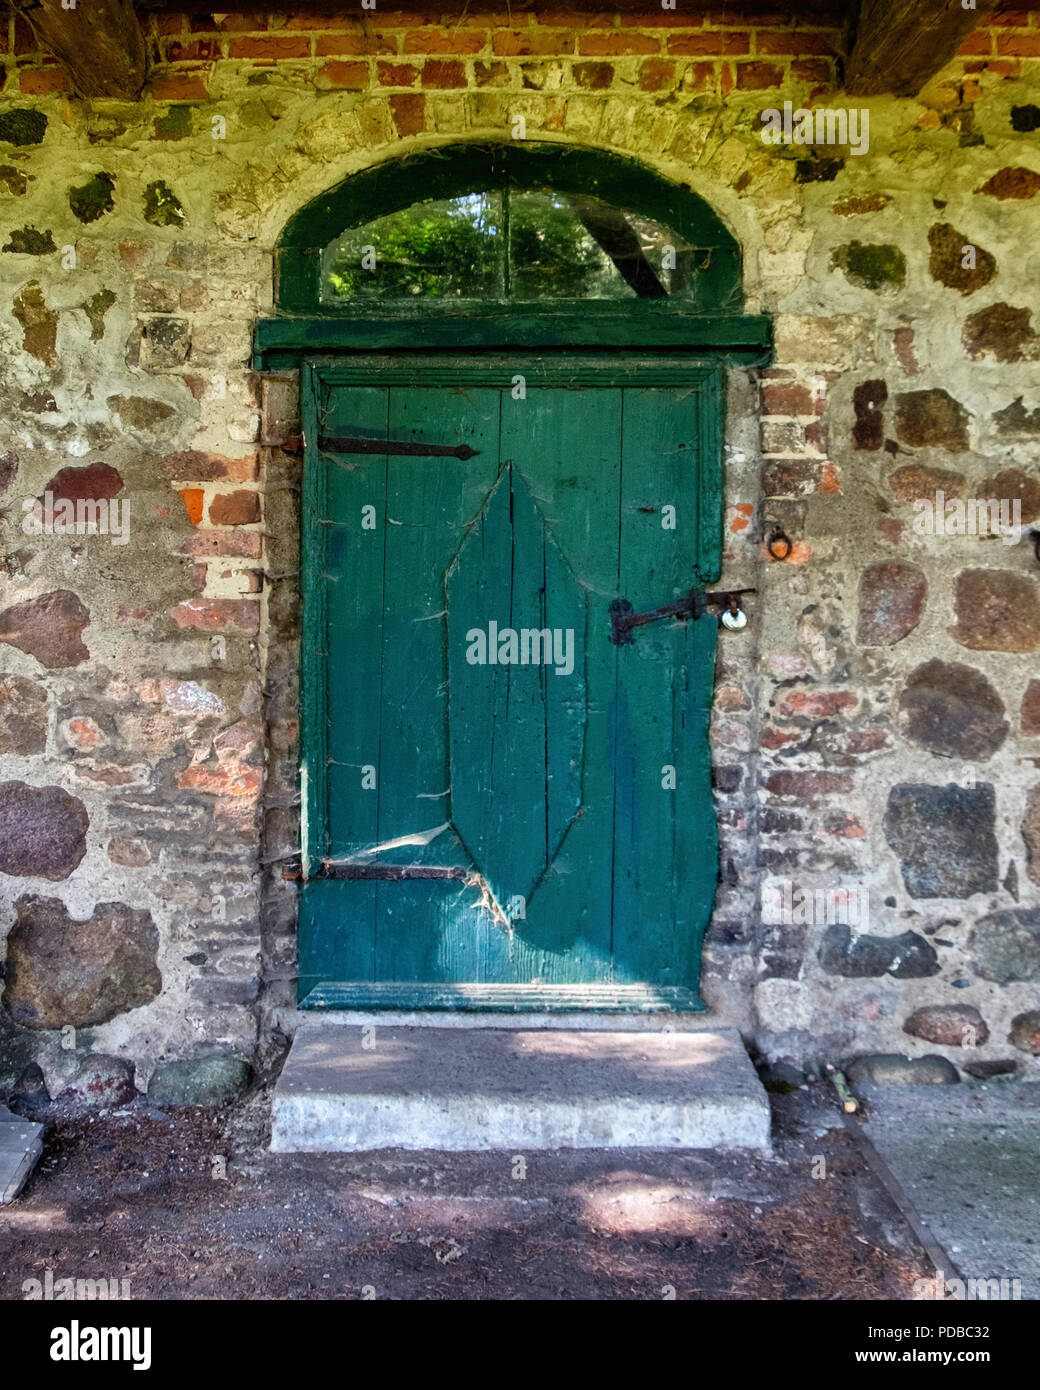 Germany,Stolpe an der Peene, Historic old blacksmith on Gutshaus Stolpe Estate grounds Listed stone building detail with green wood door.              Stock Photo